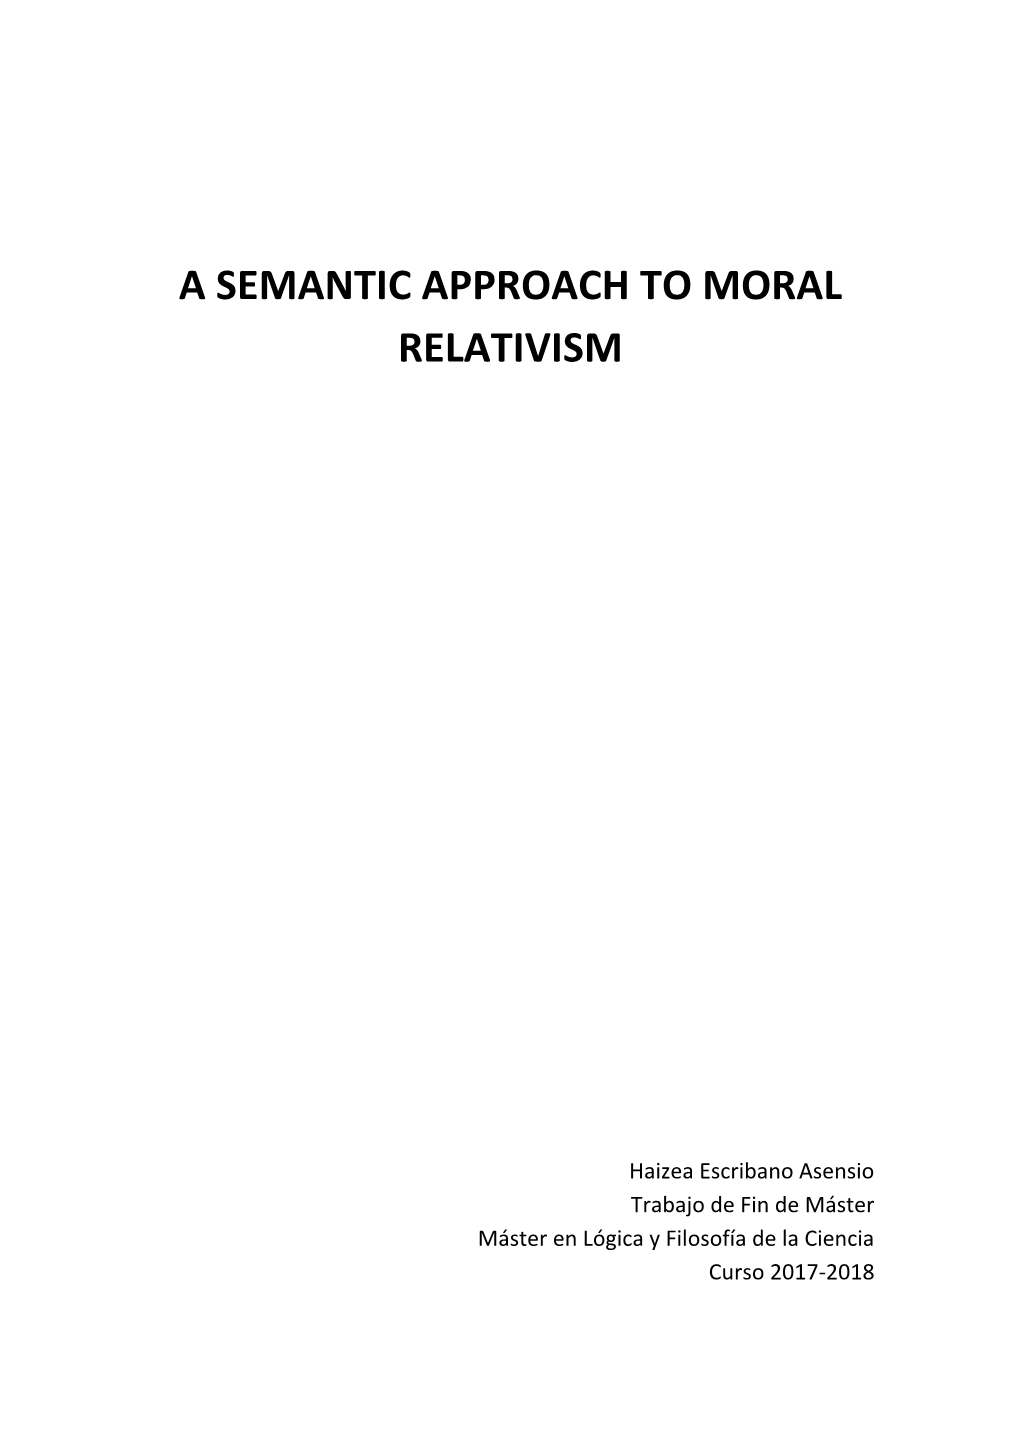 A Semantic Approach to Moral Relativism